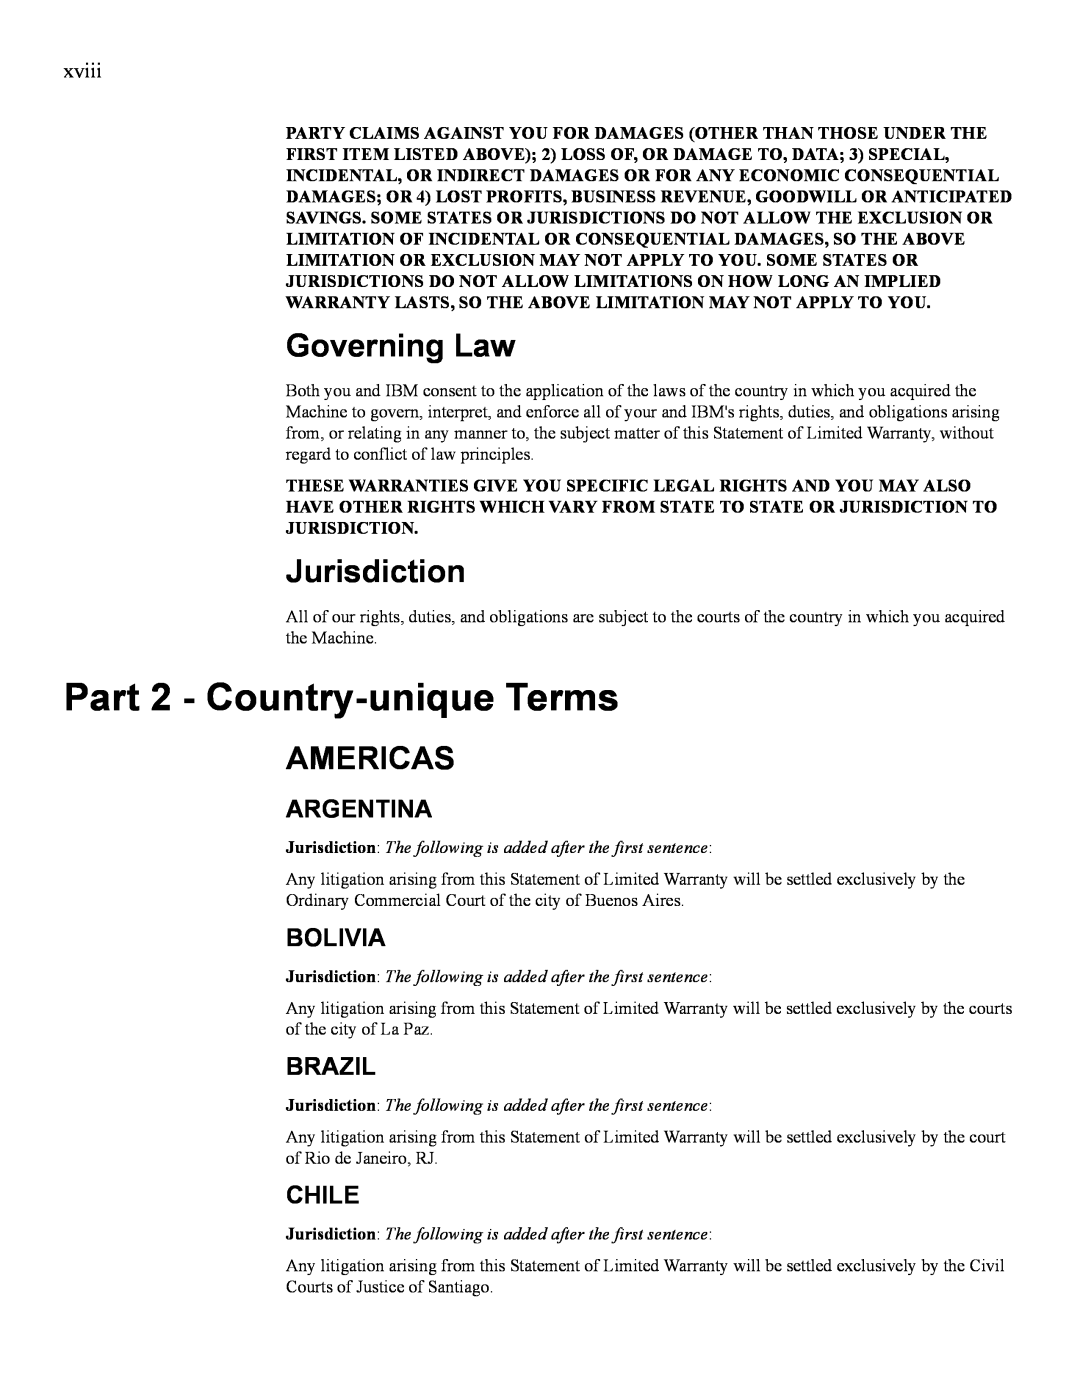 IBM 24R9718 IB Part 2 - Country-unique Terms, Governing Law, Jurisdiction, Americas, Argentina, Bolivia, Brazil, Chile 